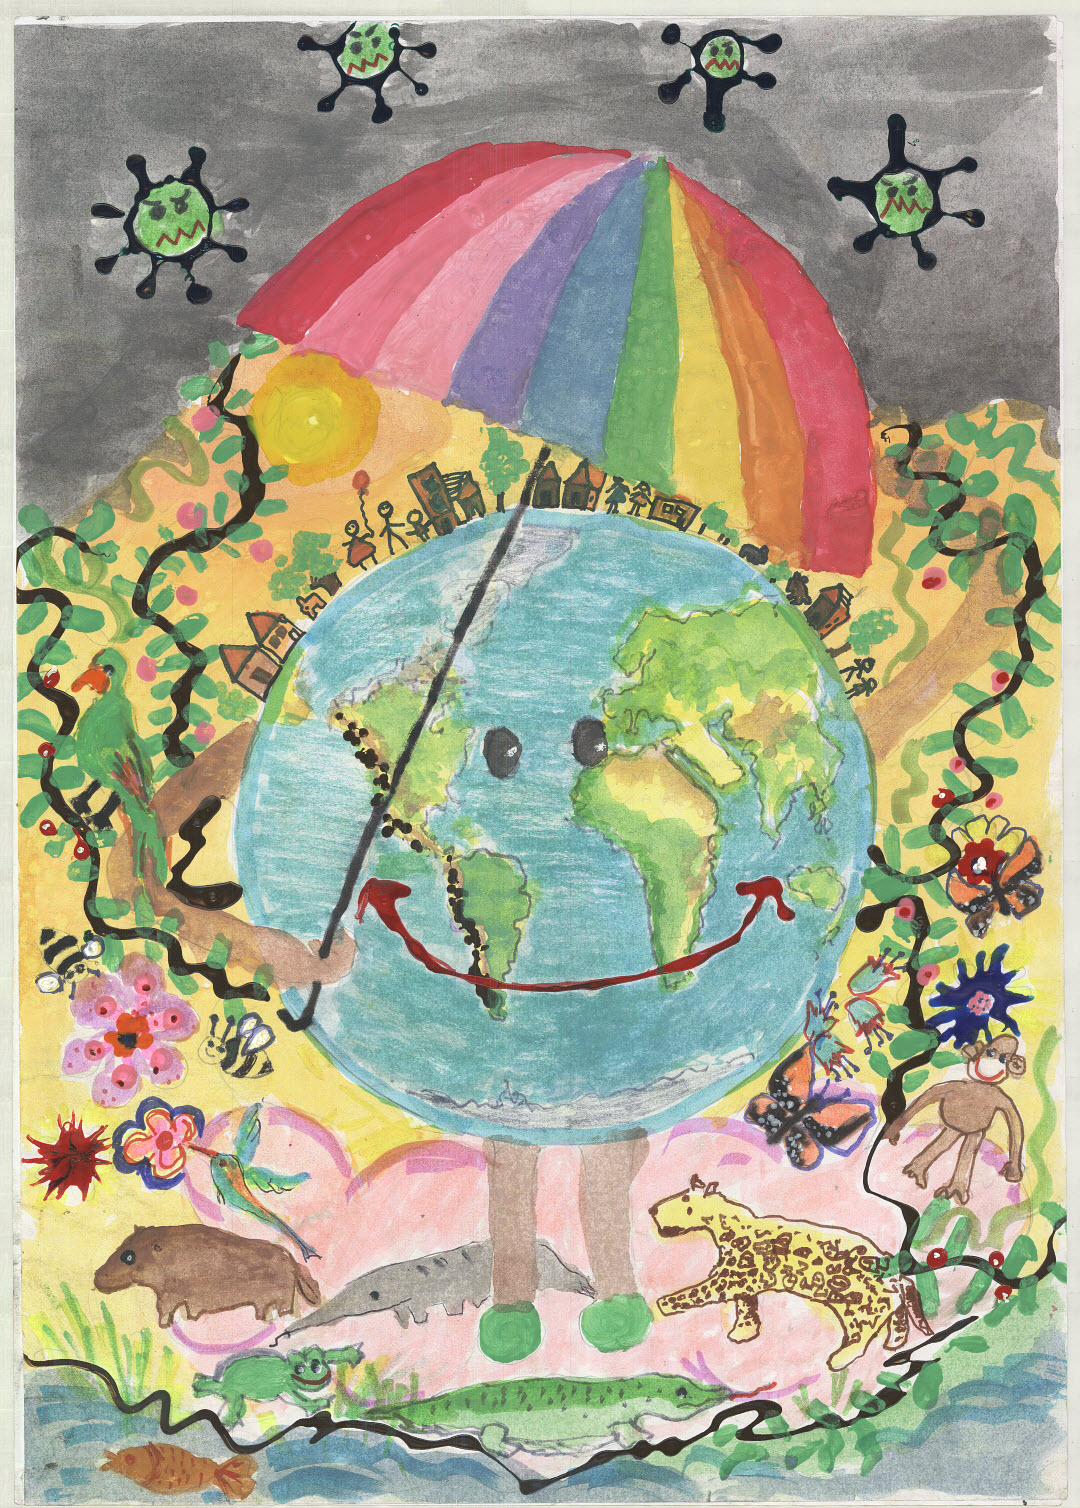 Map showing happy planet, with a rainbow umbrella, animals but overshadowed by covid-19